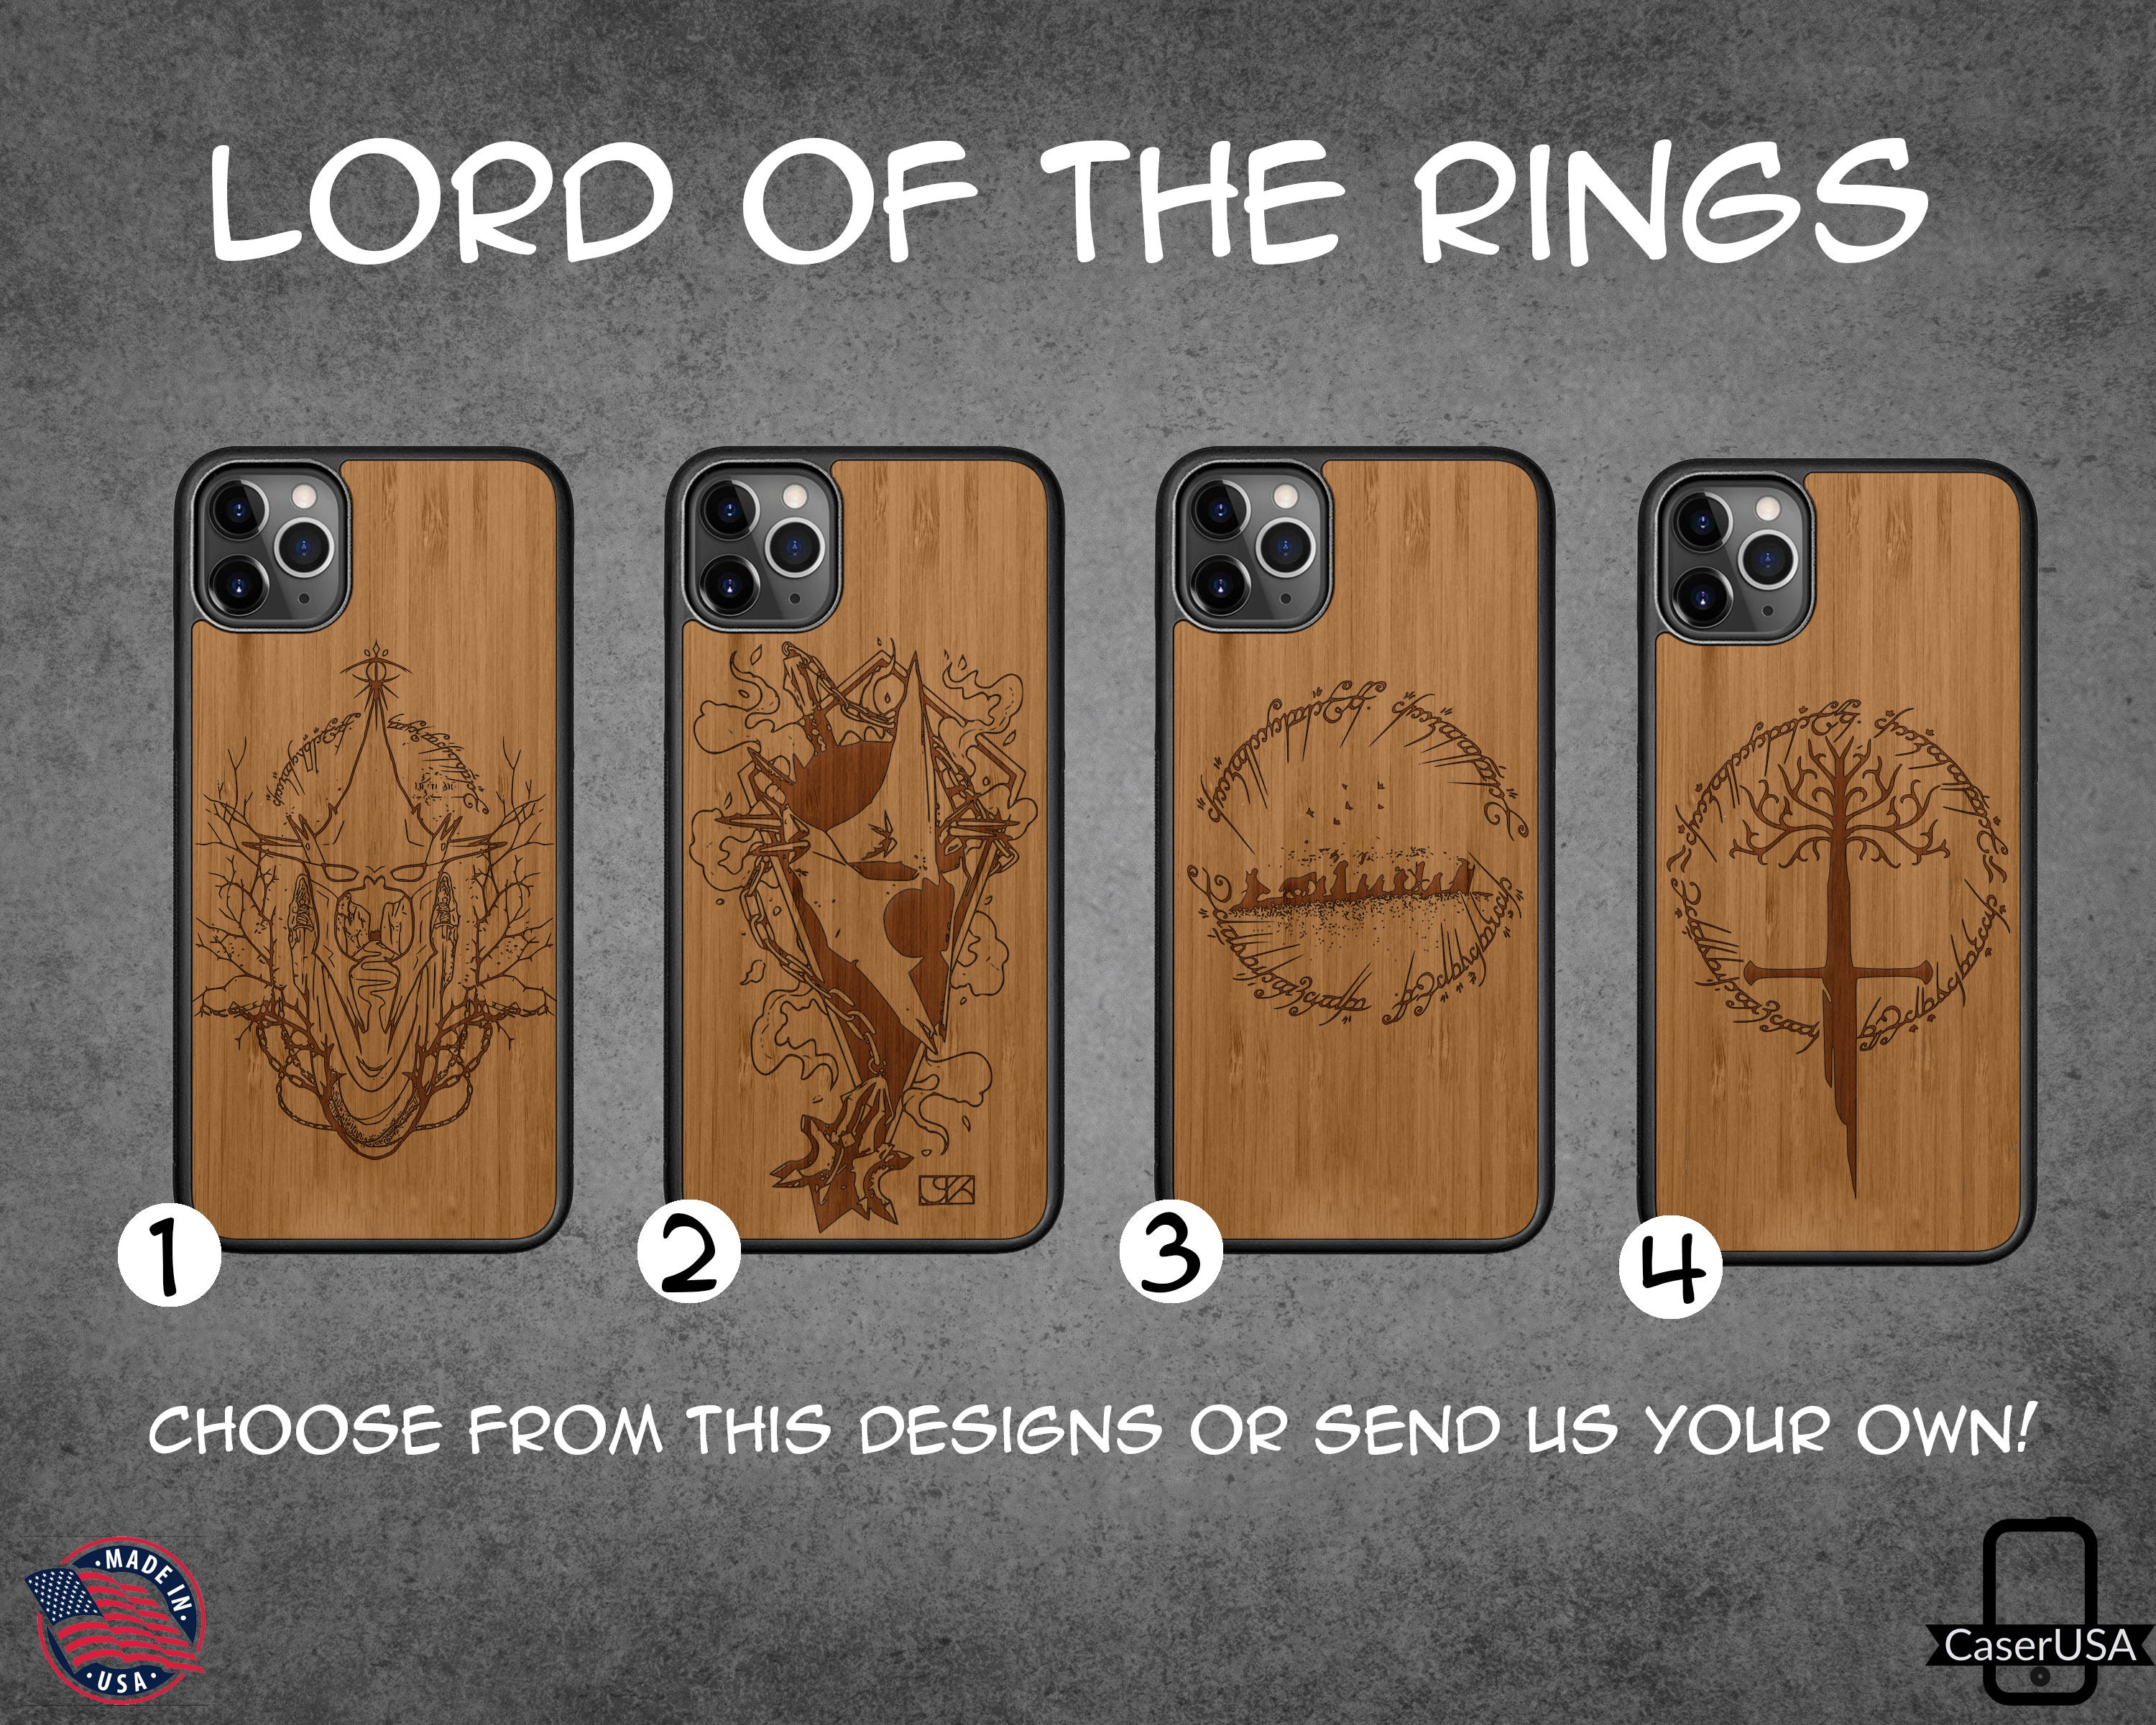 Lord of the Rings - Gollum Phone Case  Custom phone cases, Case, Phone  cases